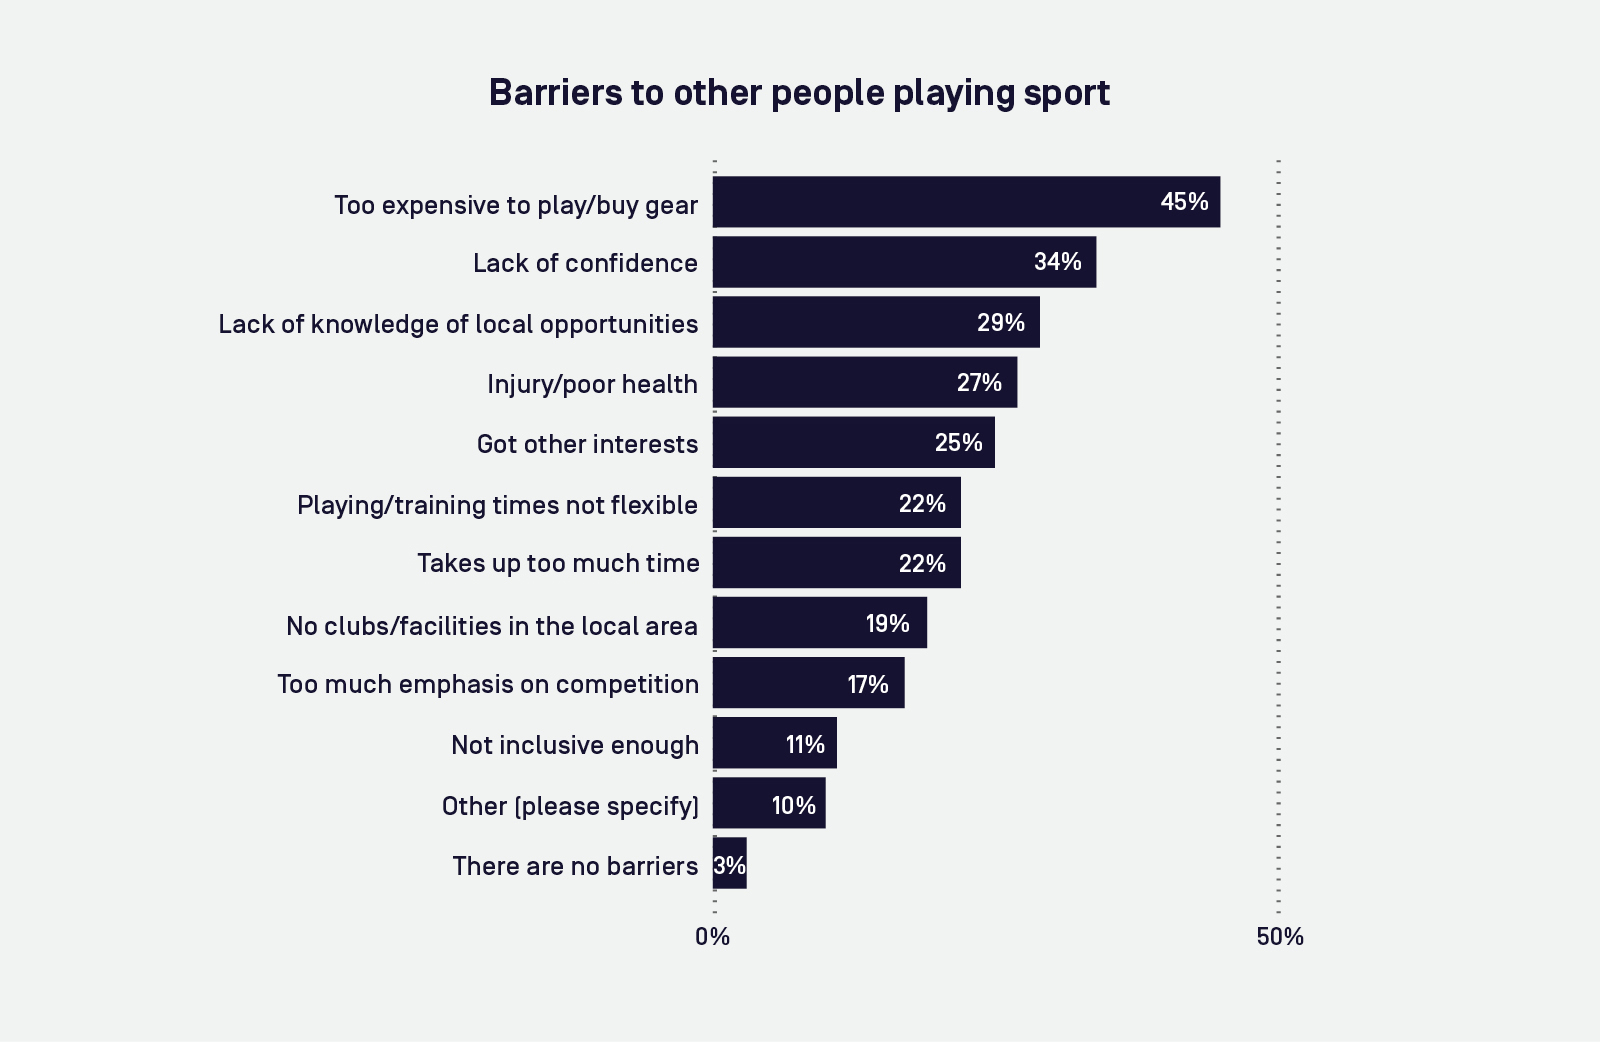 Bar graph showing the reasons respondents gave for others not to participate in sport details below